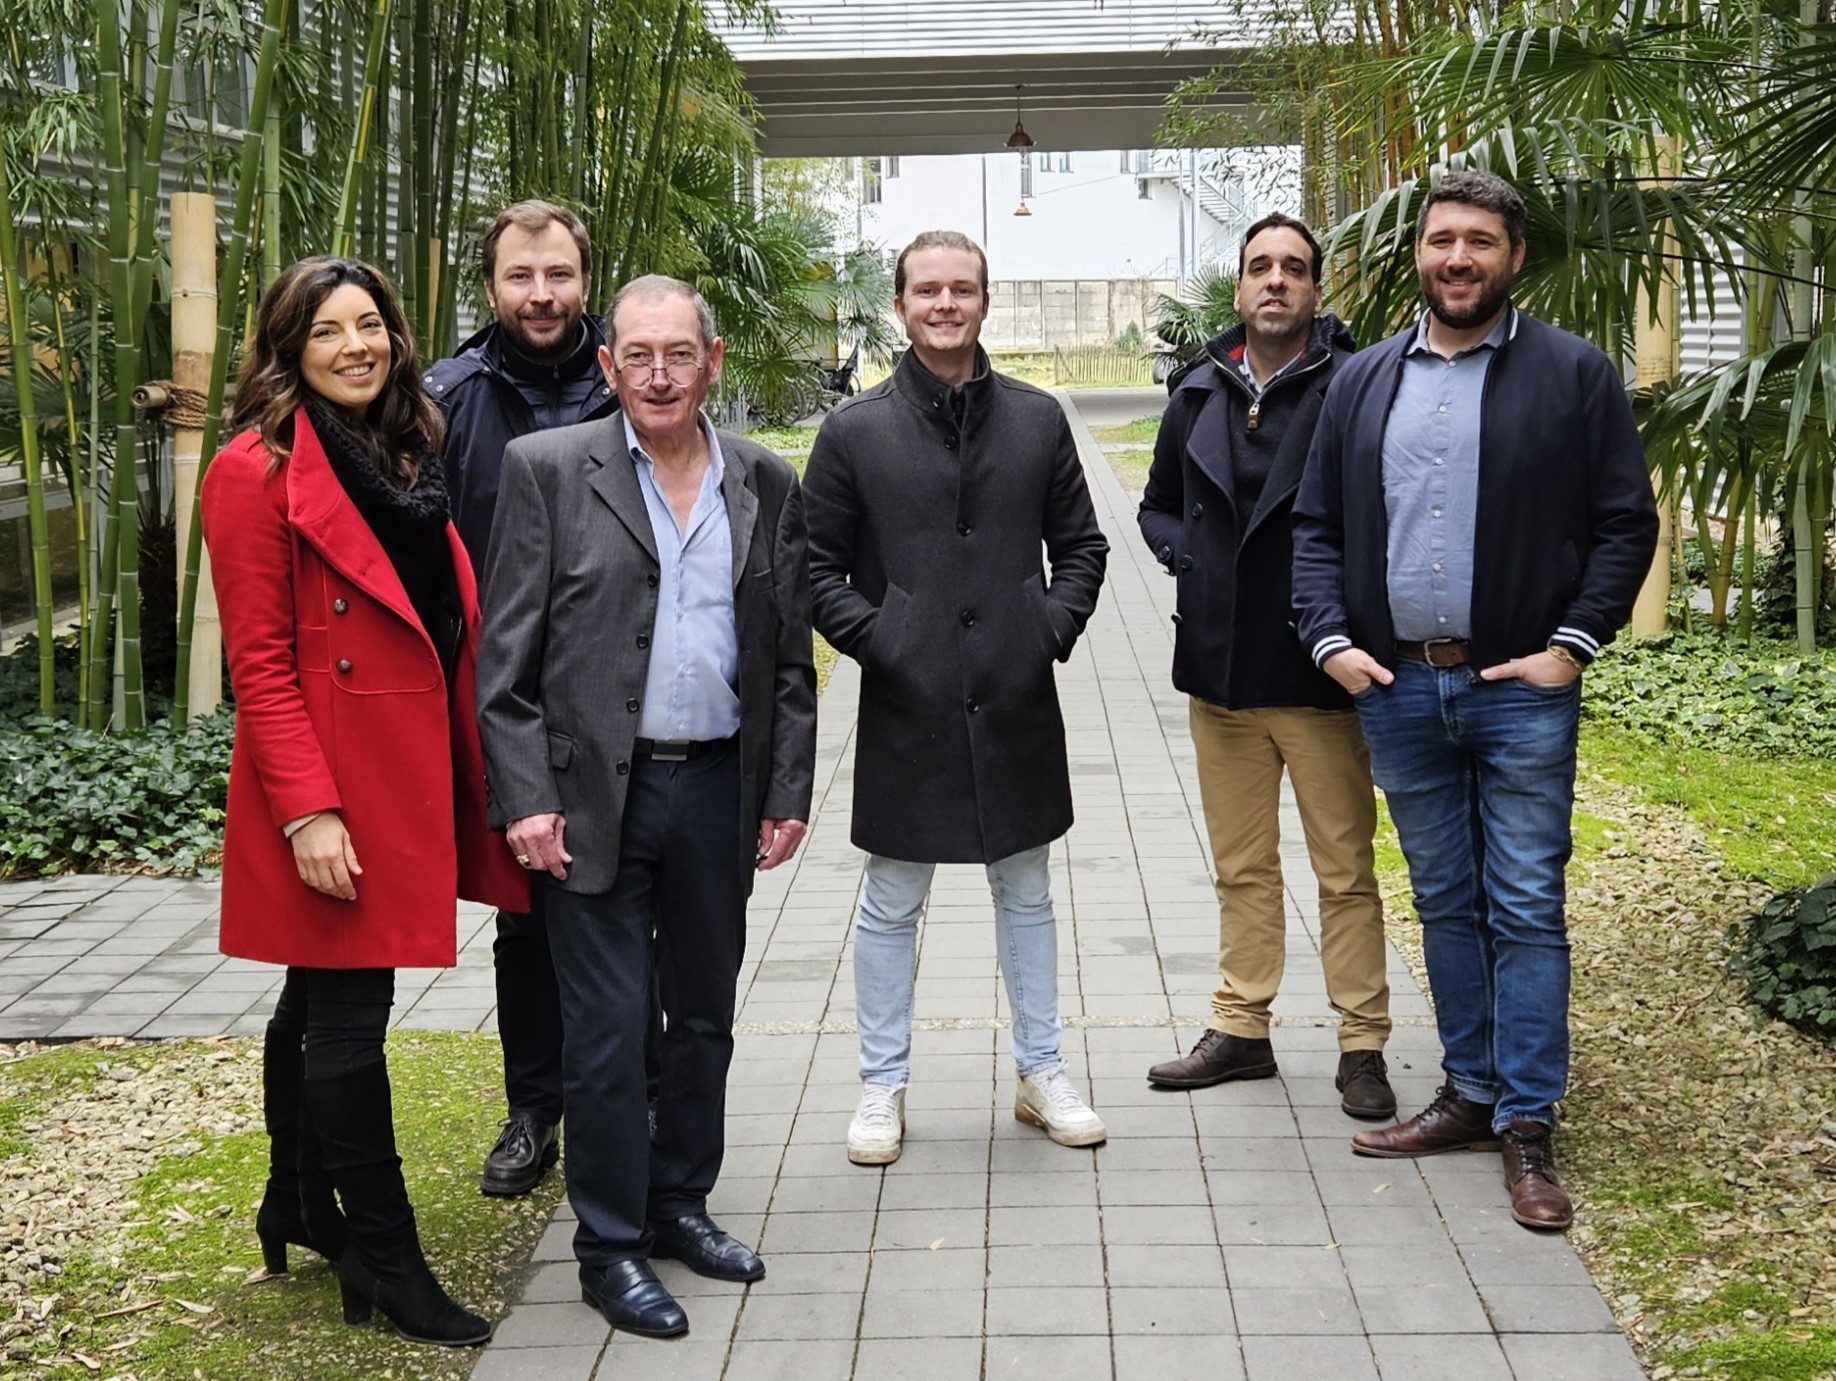 André et Carole Borie (S.I. ENERGIE) ; Justin Leroy (Pitchme.tv) ; Julien Roulland (B2G) ; Anthony Le Bleis (Start-up manager Unitec) ; Cyril Delbos (start-up manager Sarlatech)